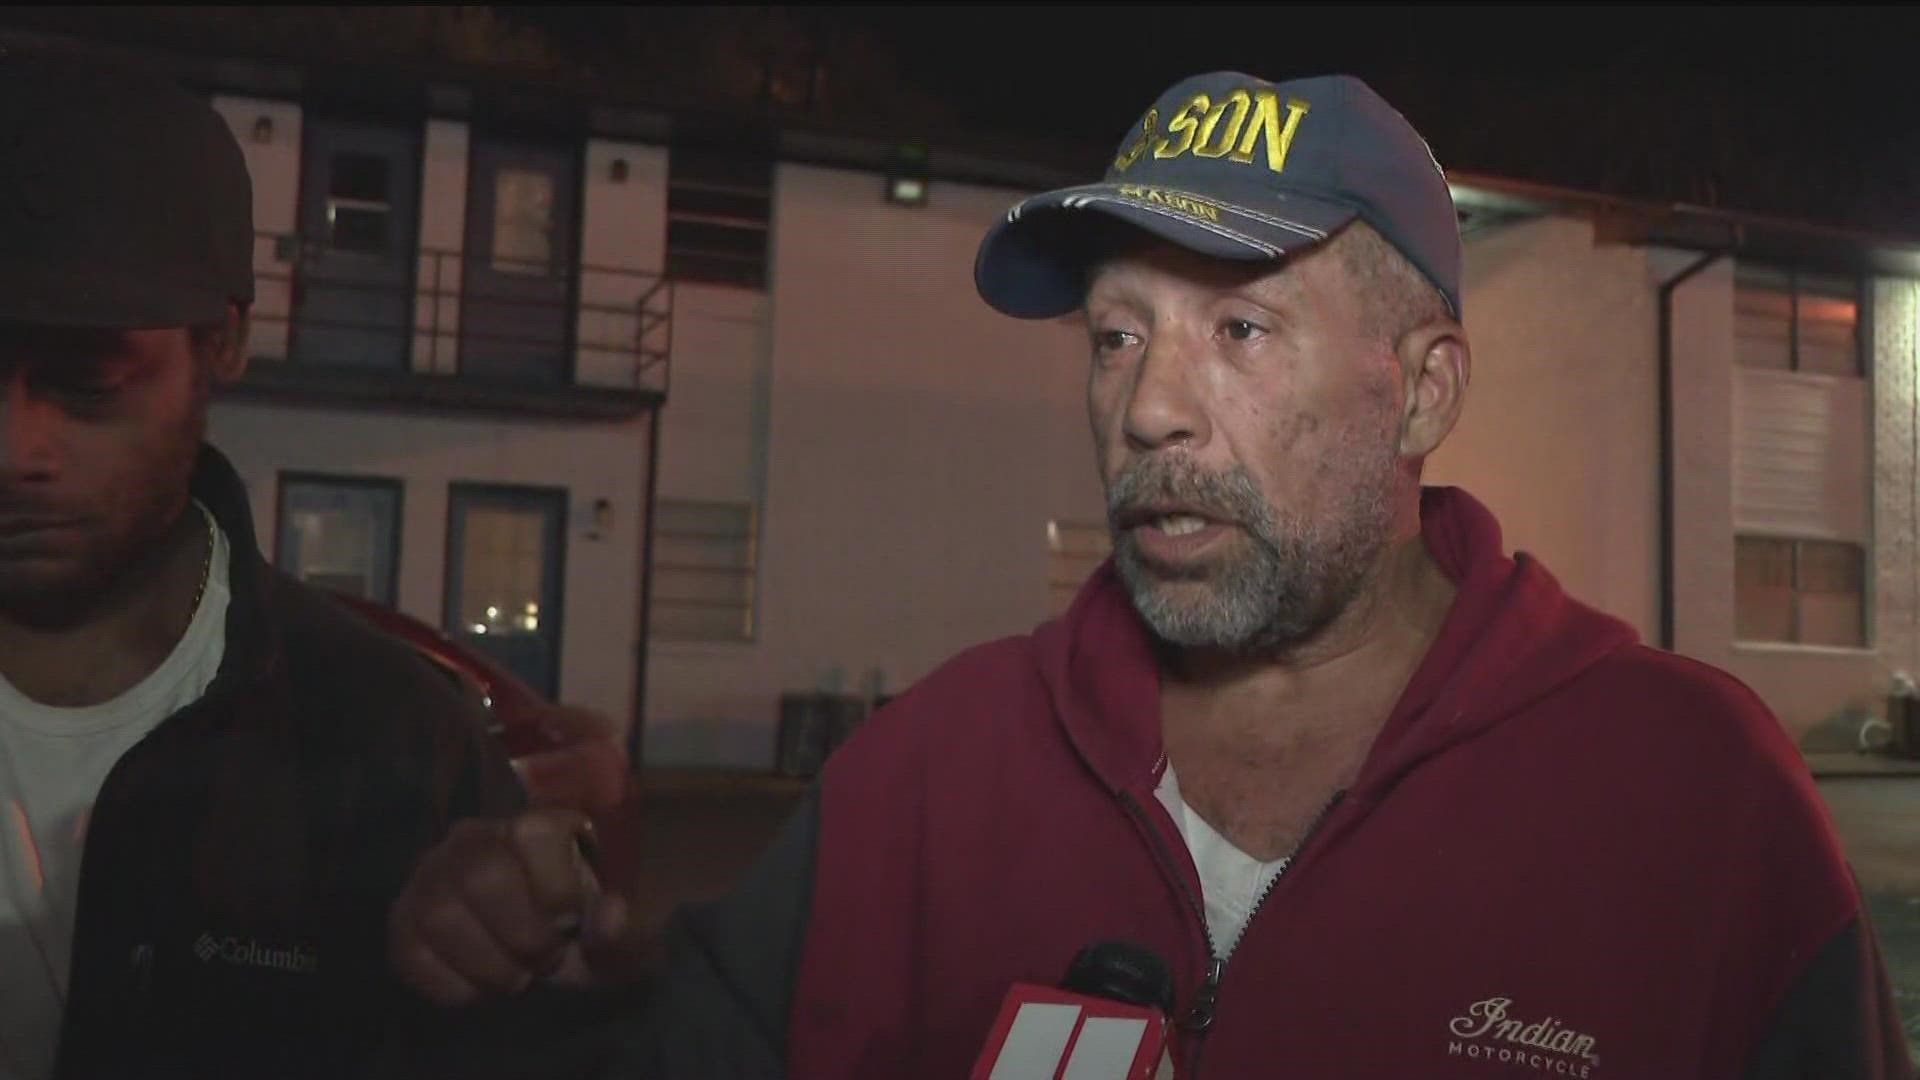 The man known to people in the complex as "Uncle Tol" sprang into action and risked his life to save his neighbors.